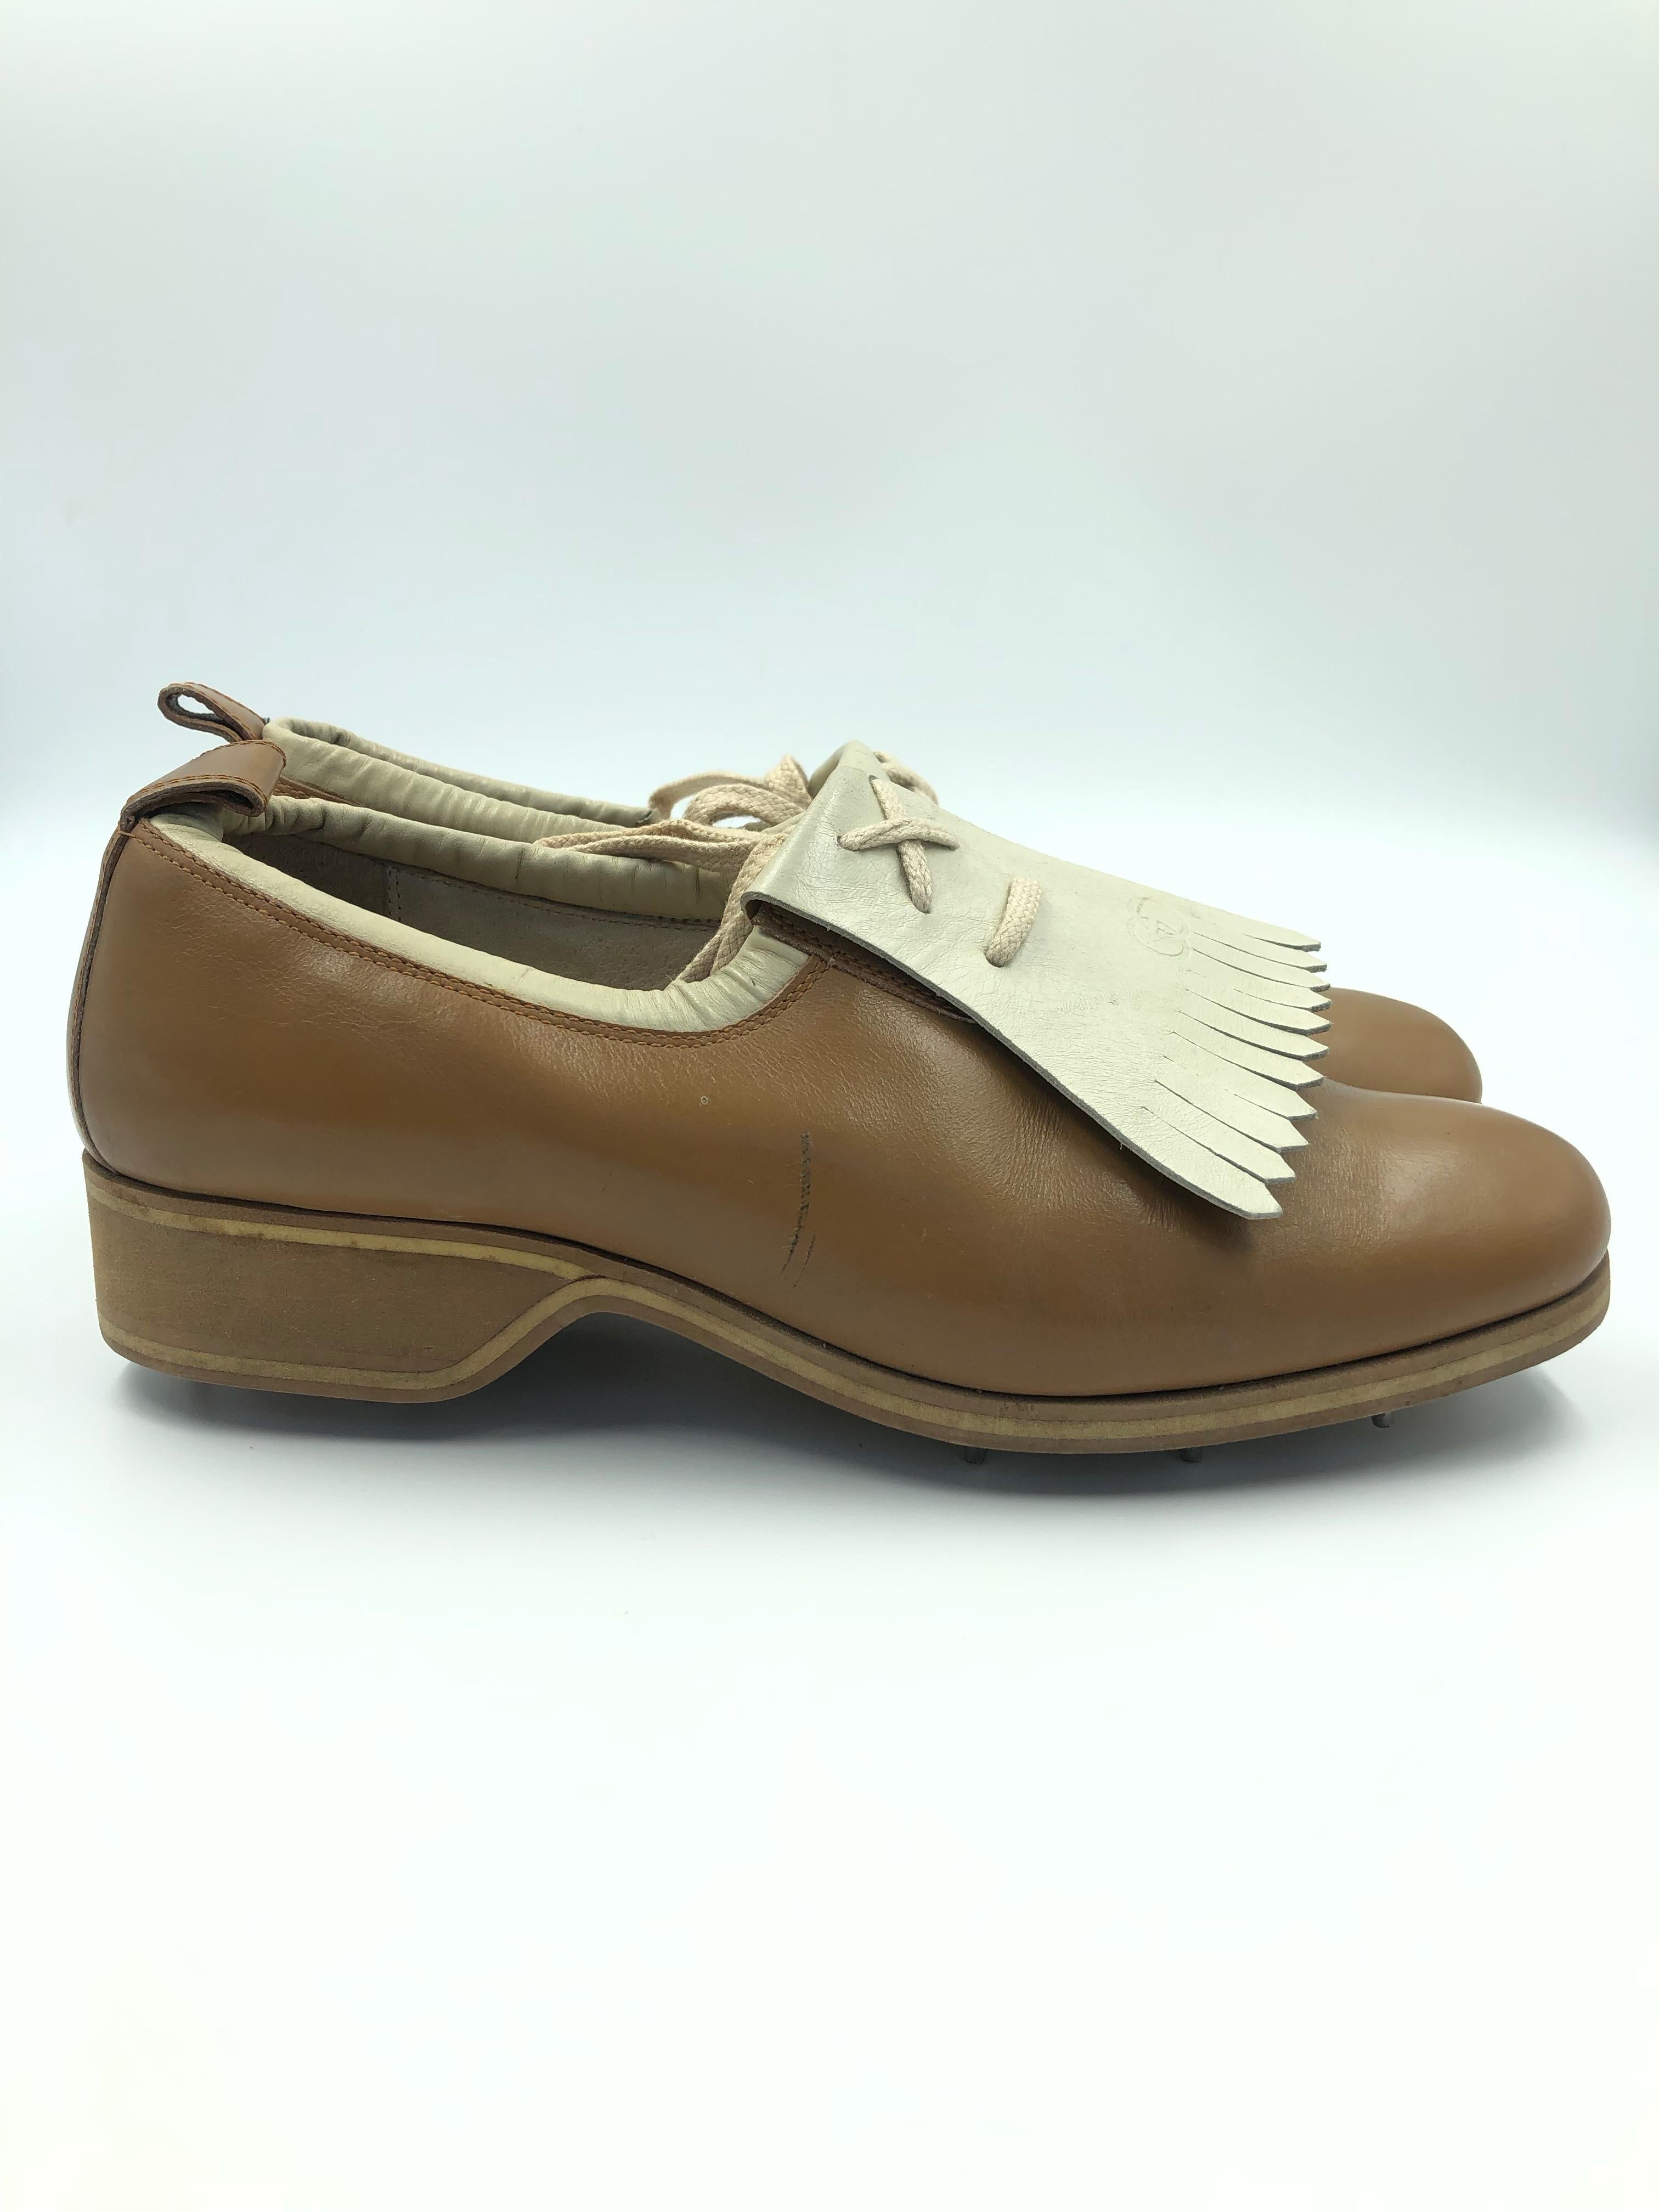 Gucci Collectors Vintage Golf Shoe with Cleats Tan and Cream 4